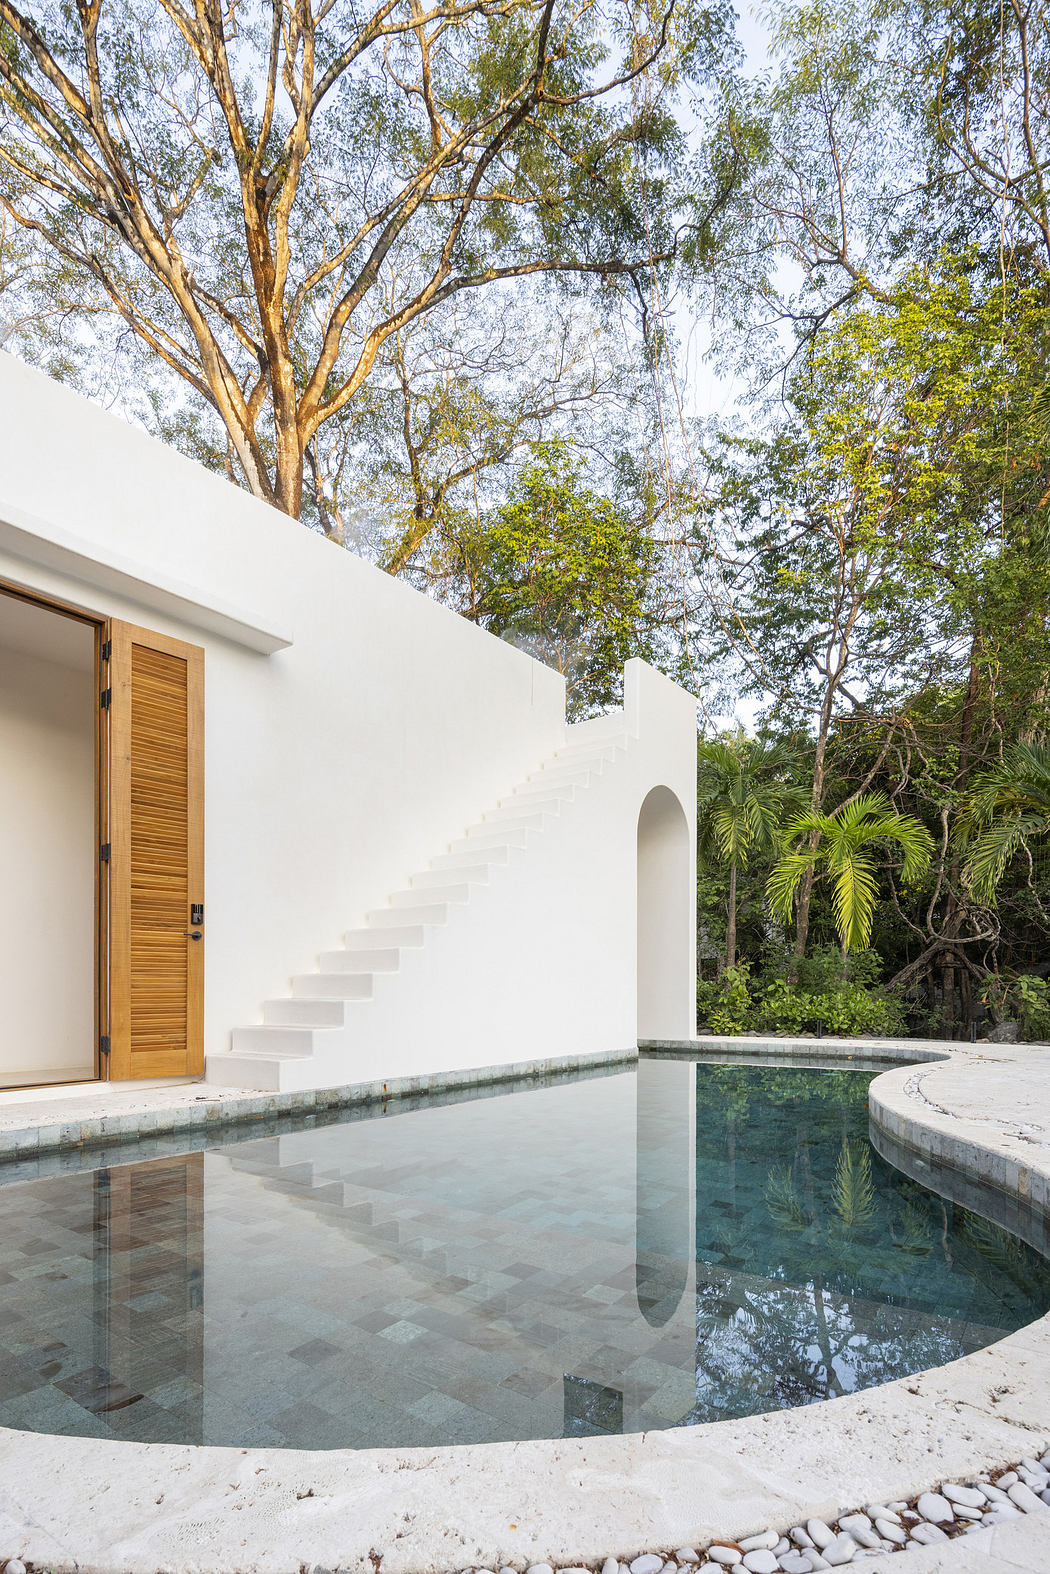 White modern house with an external staircase beside a circular pool, surrounded by trees.